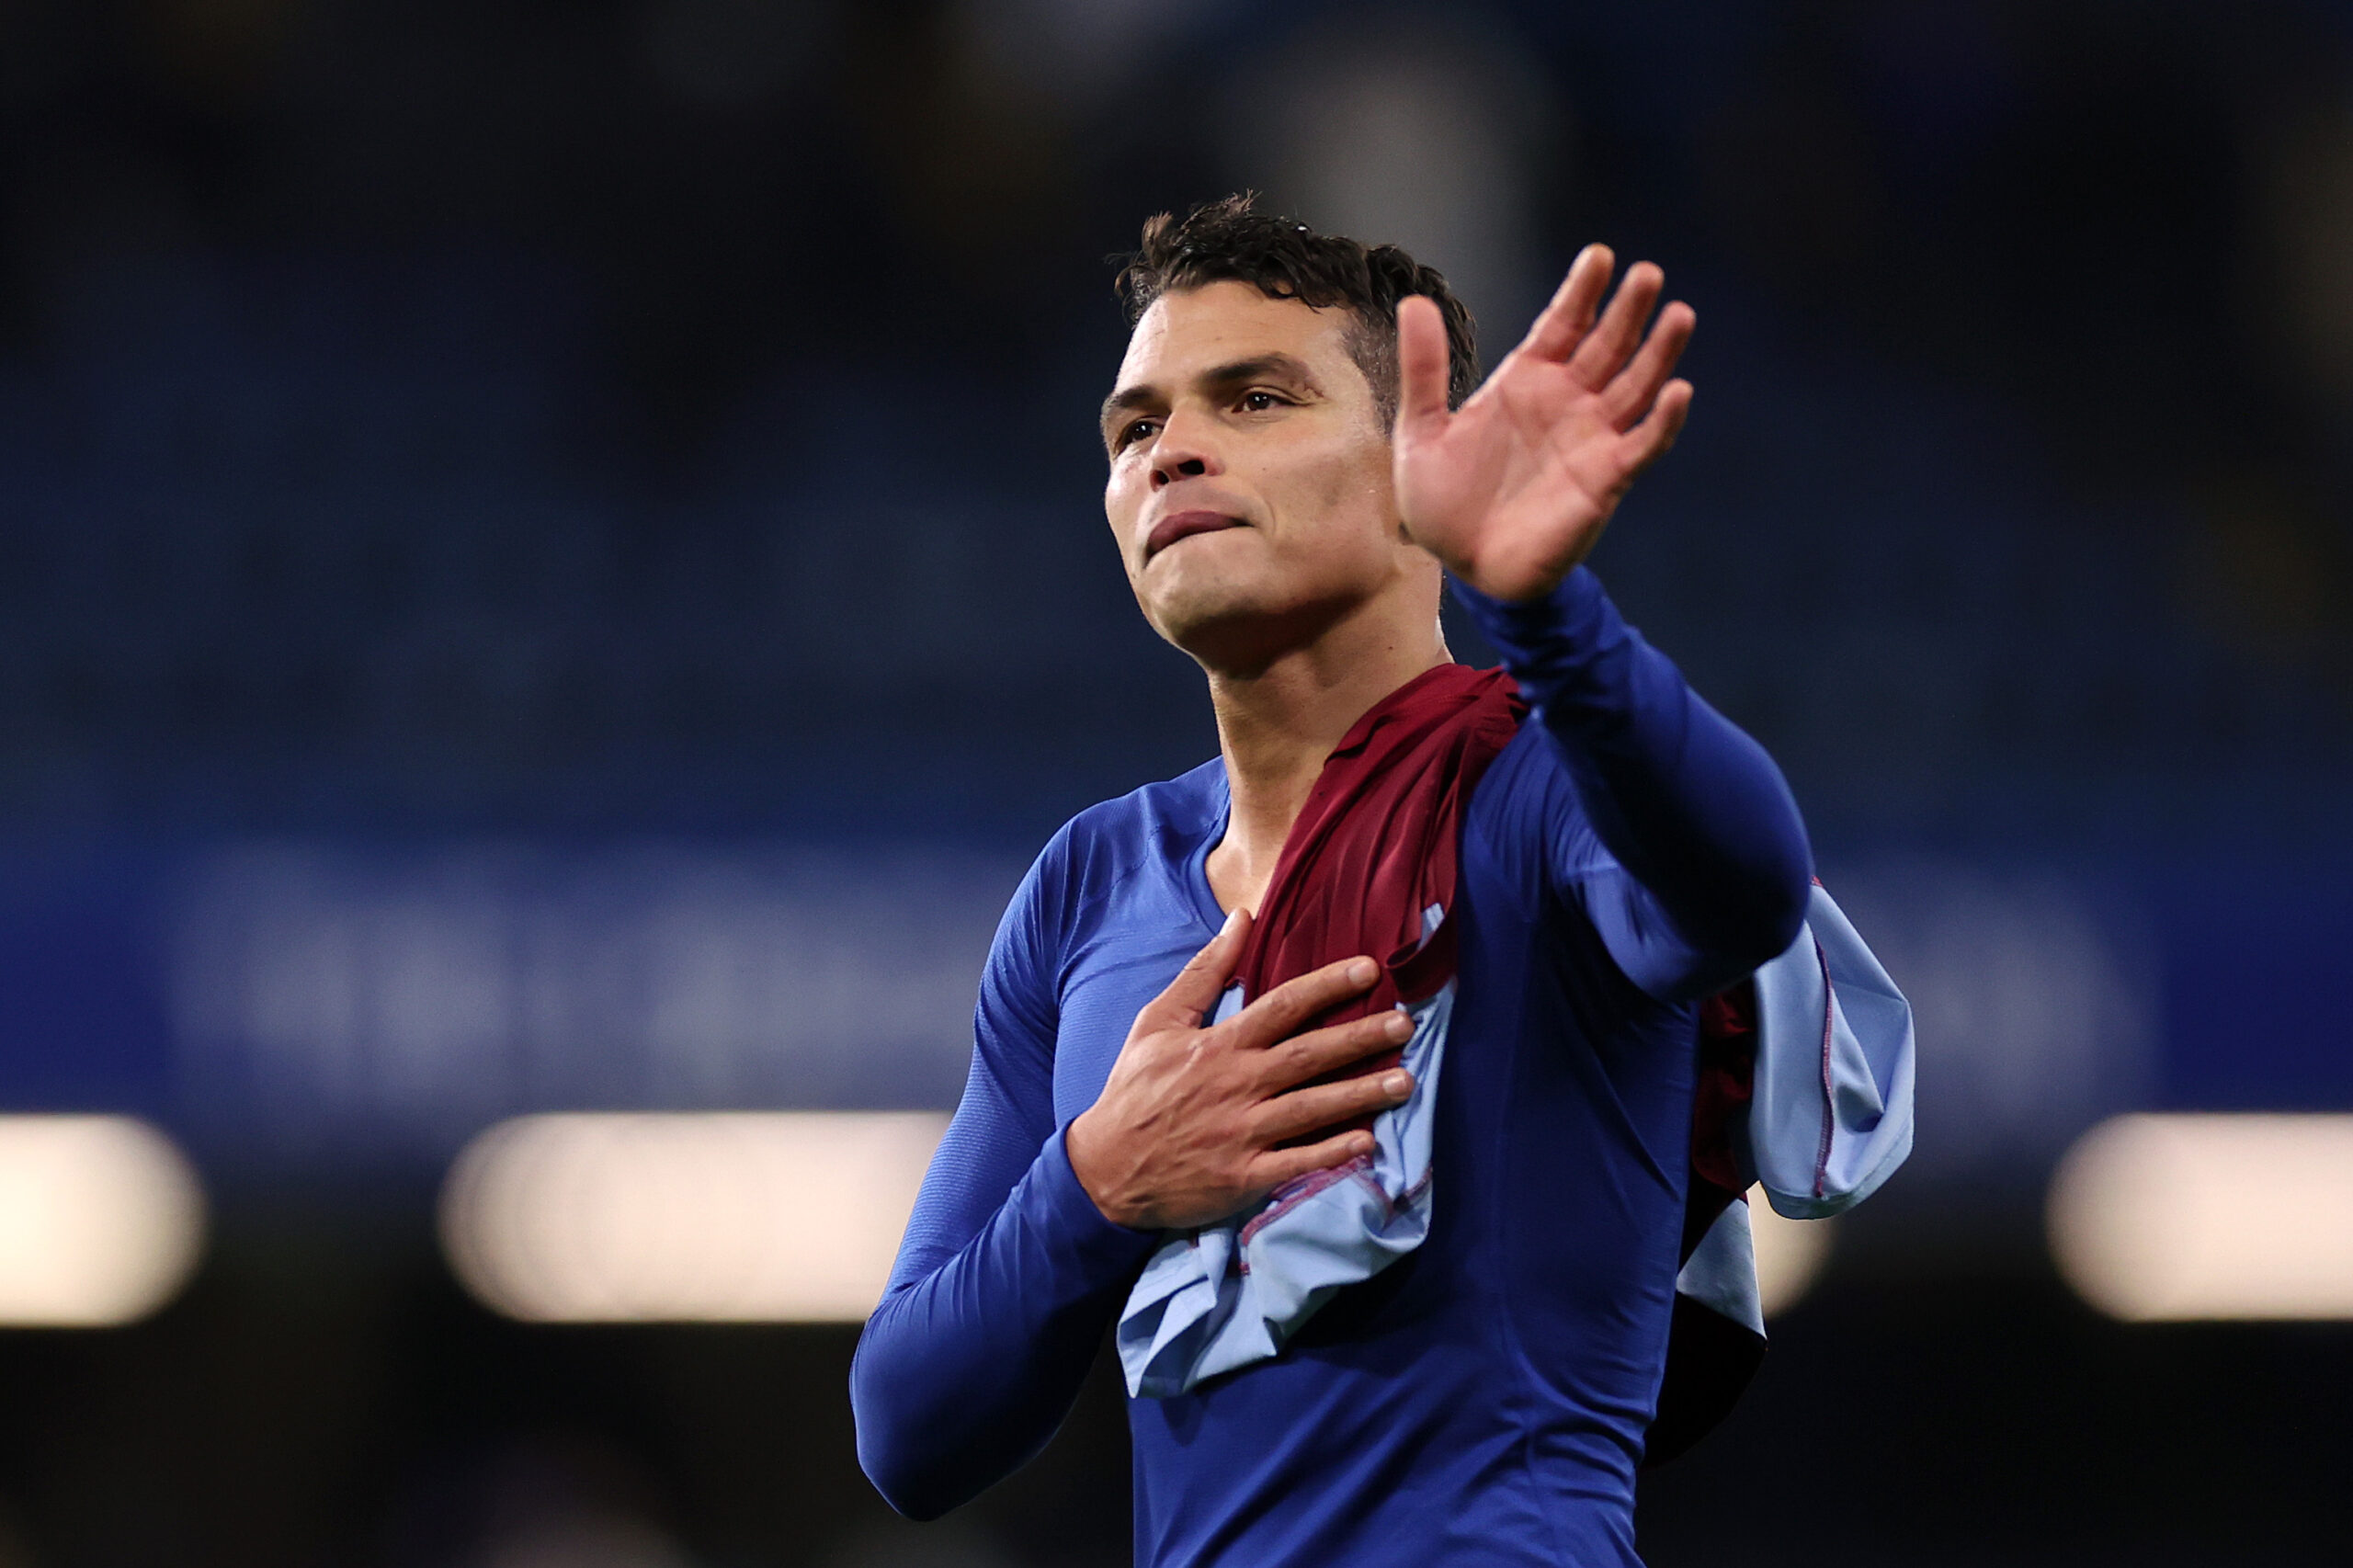 Thiago Silva intends to return to Chelsea after announcing his exit in emotional video.